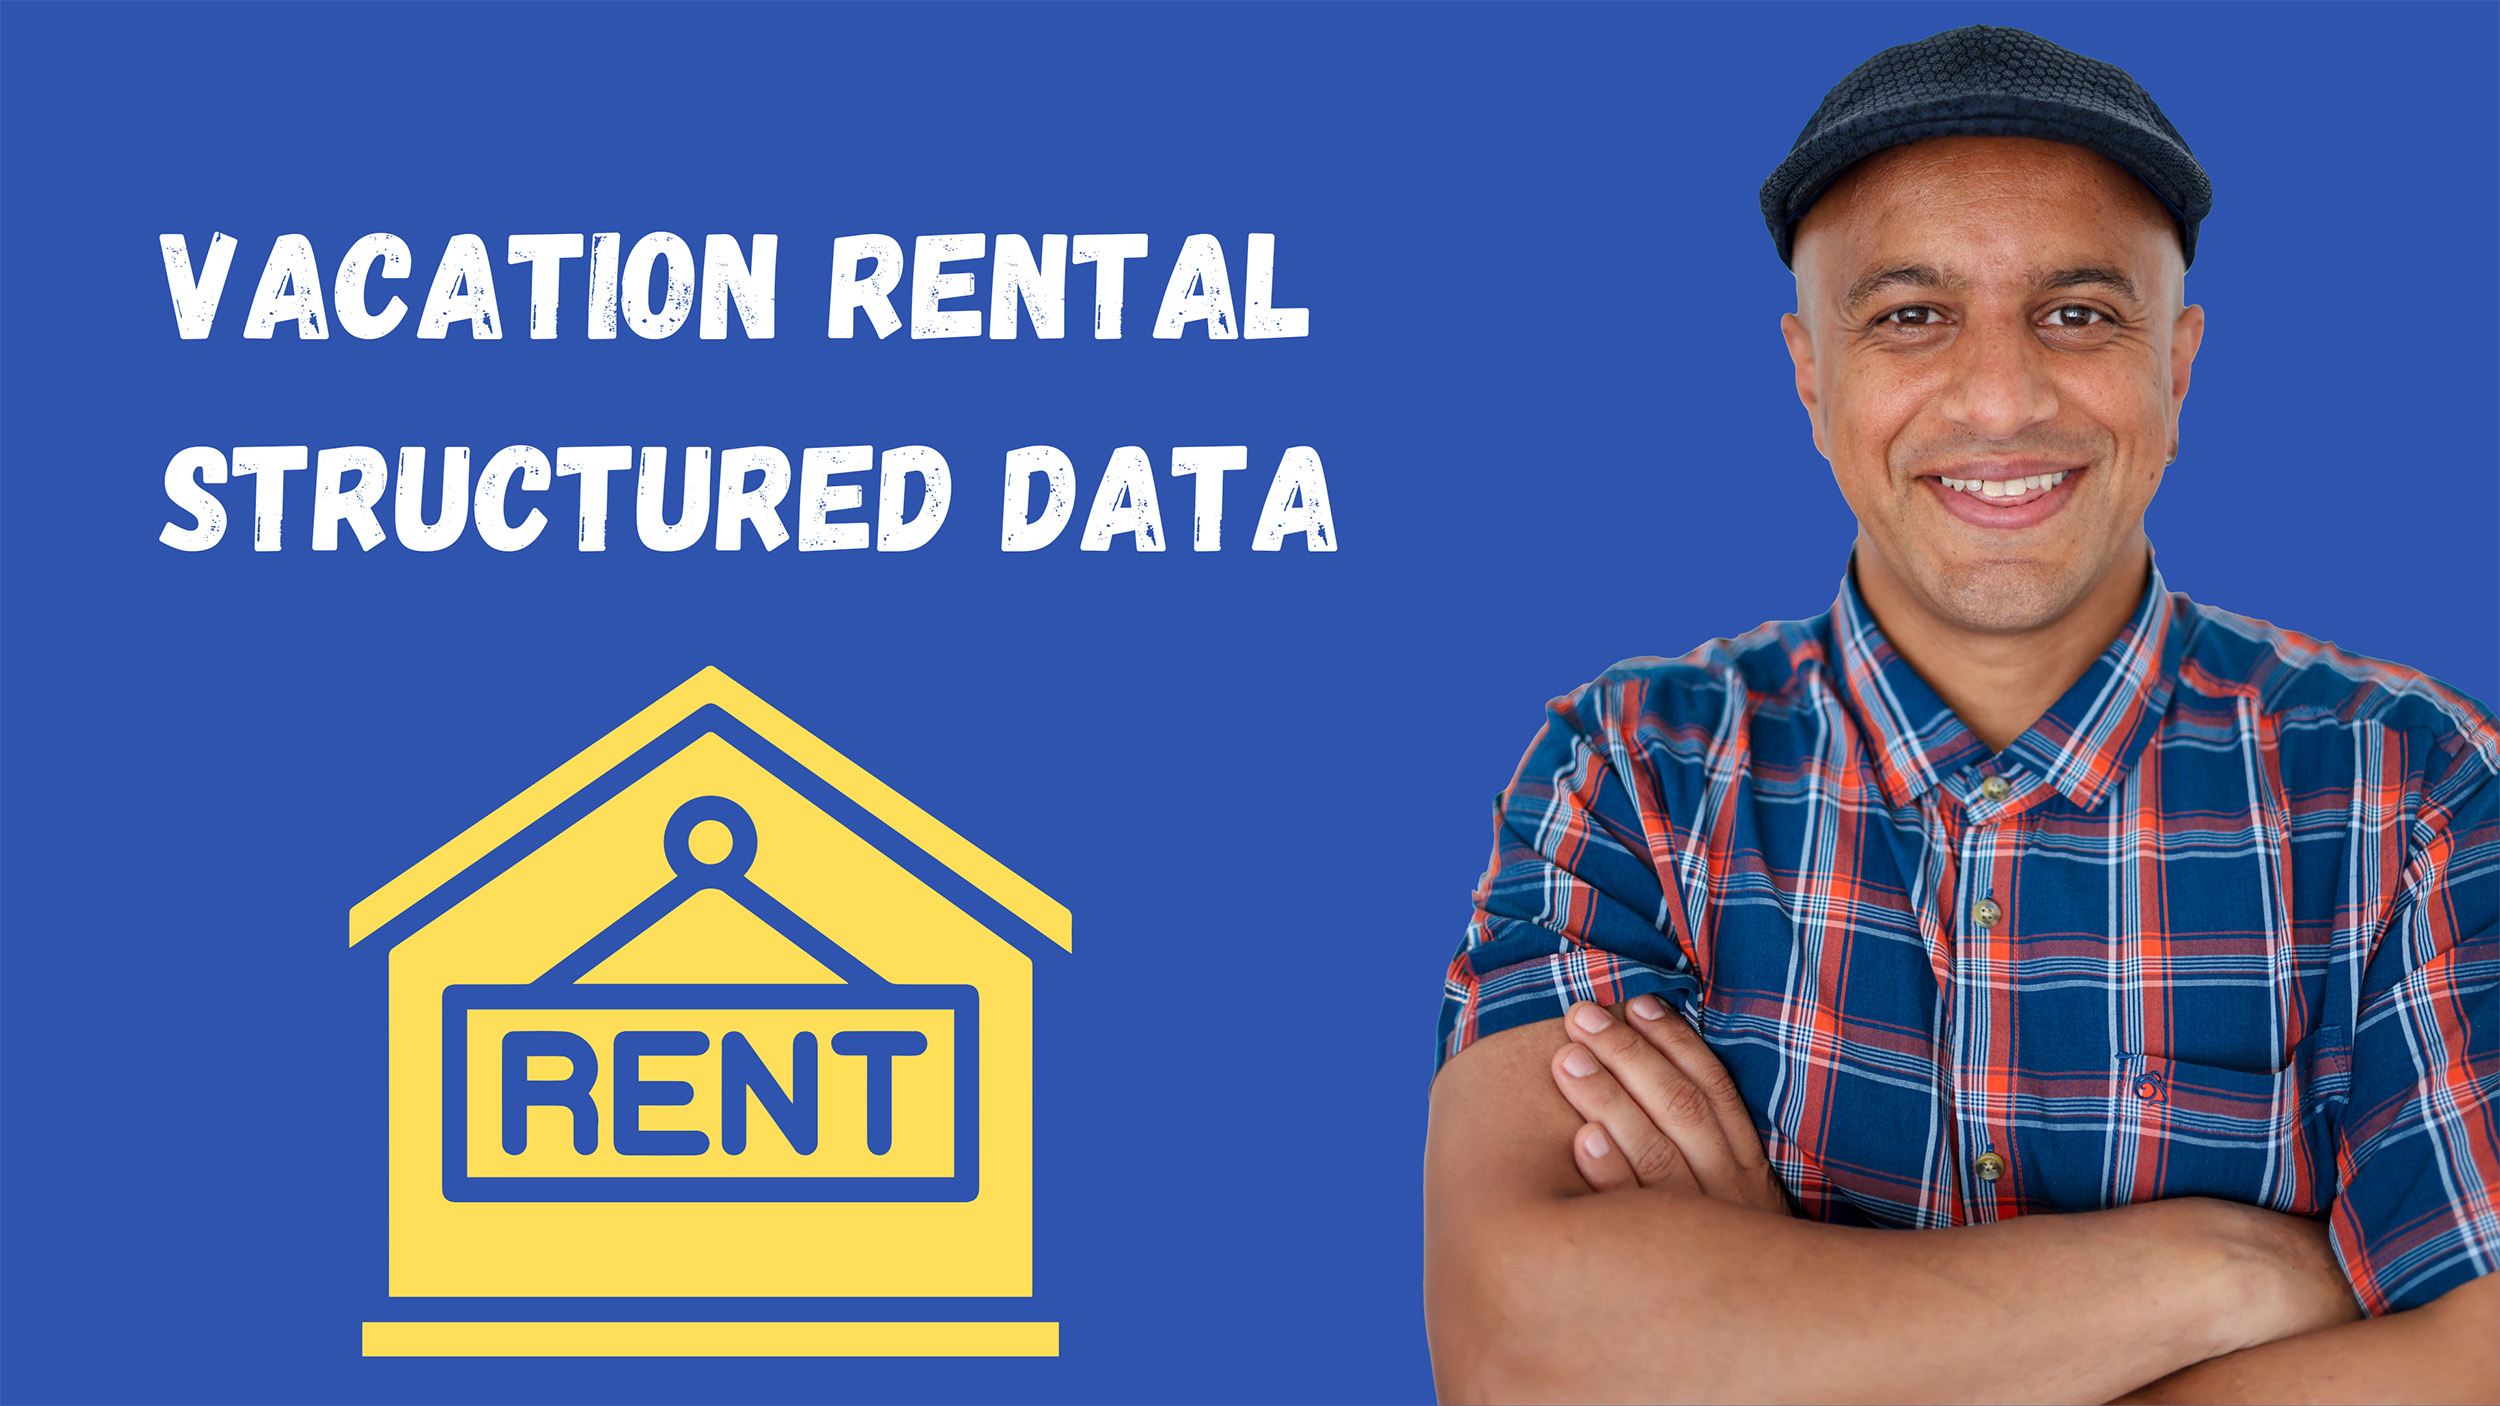 Vacation rental structured data